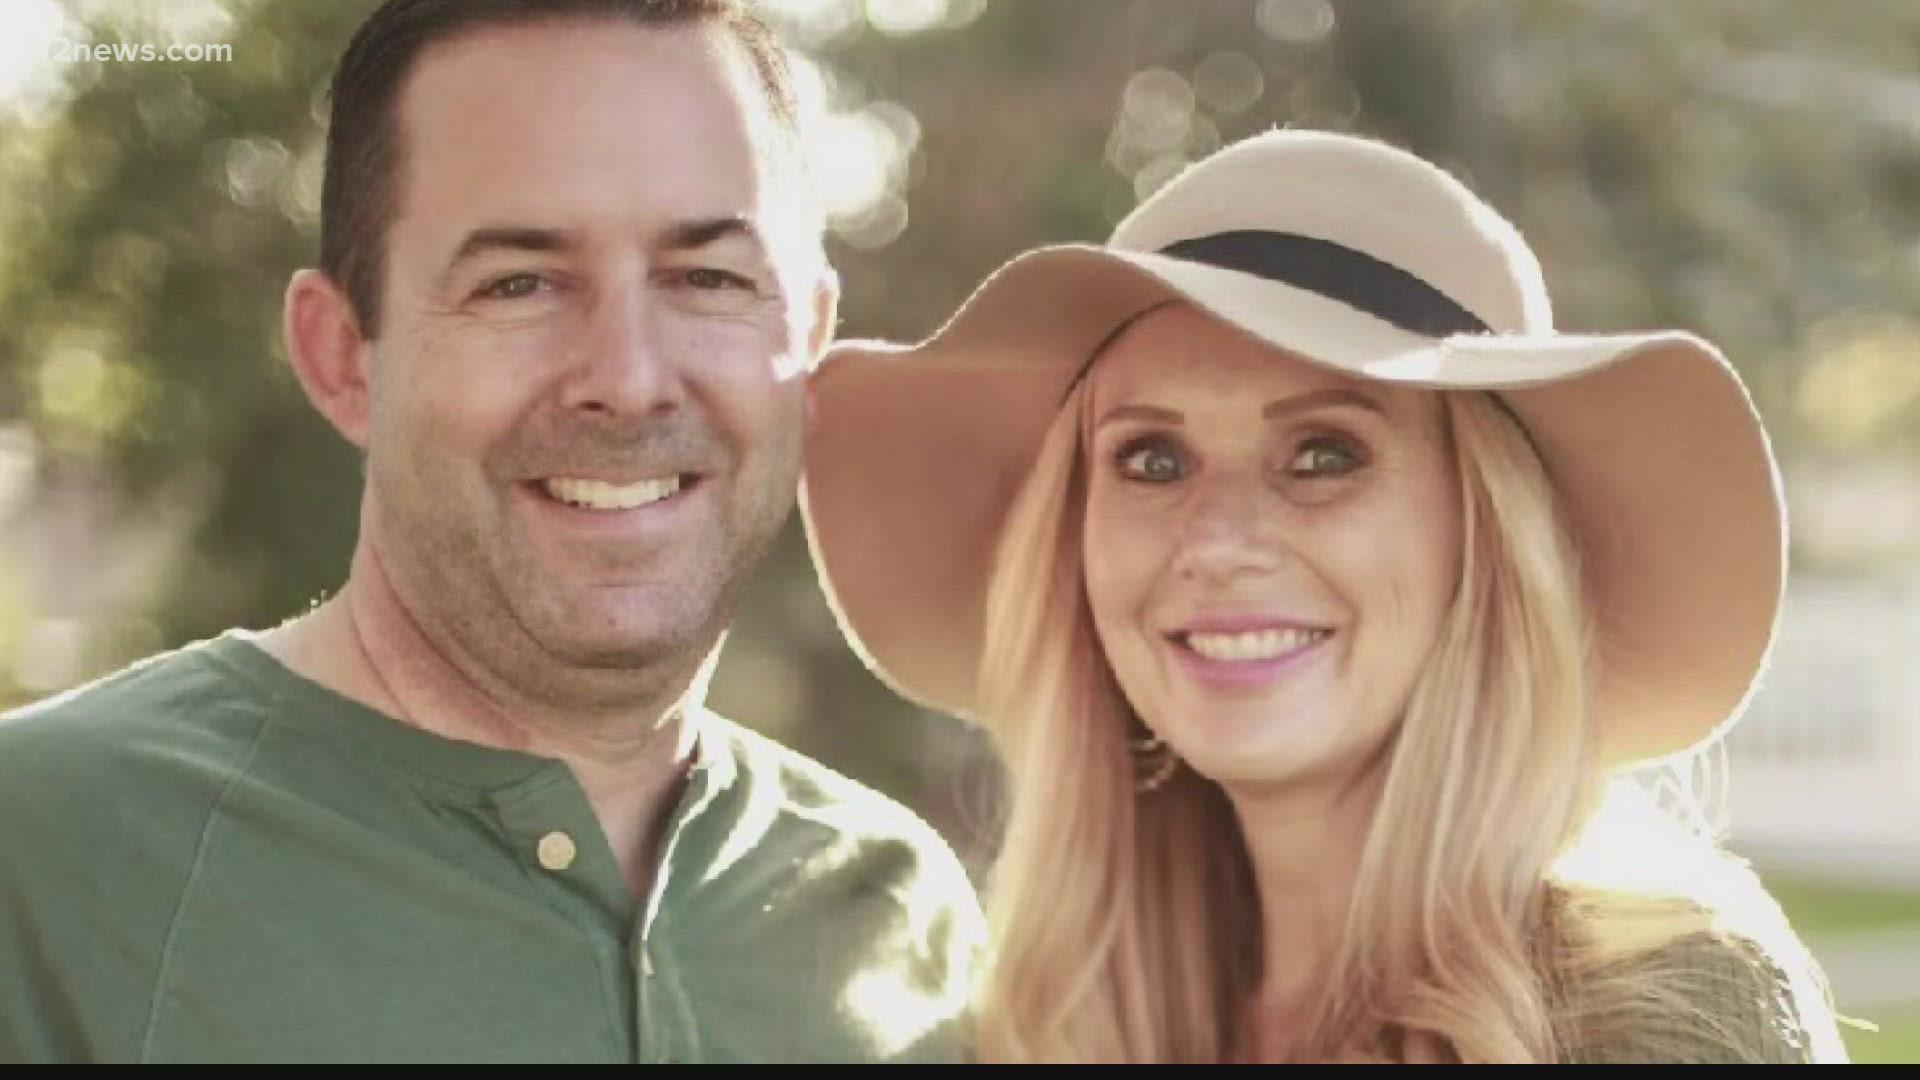 Lieutenant Chad Brackman was struck and killed while working an off-duty traffic detail in Scottsdale. His wife Melissa is speaking for the first time.